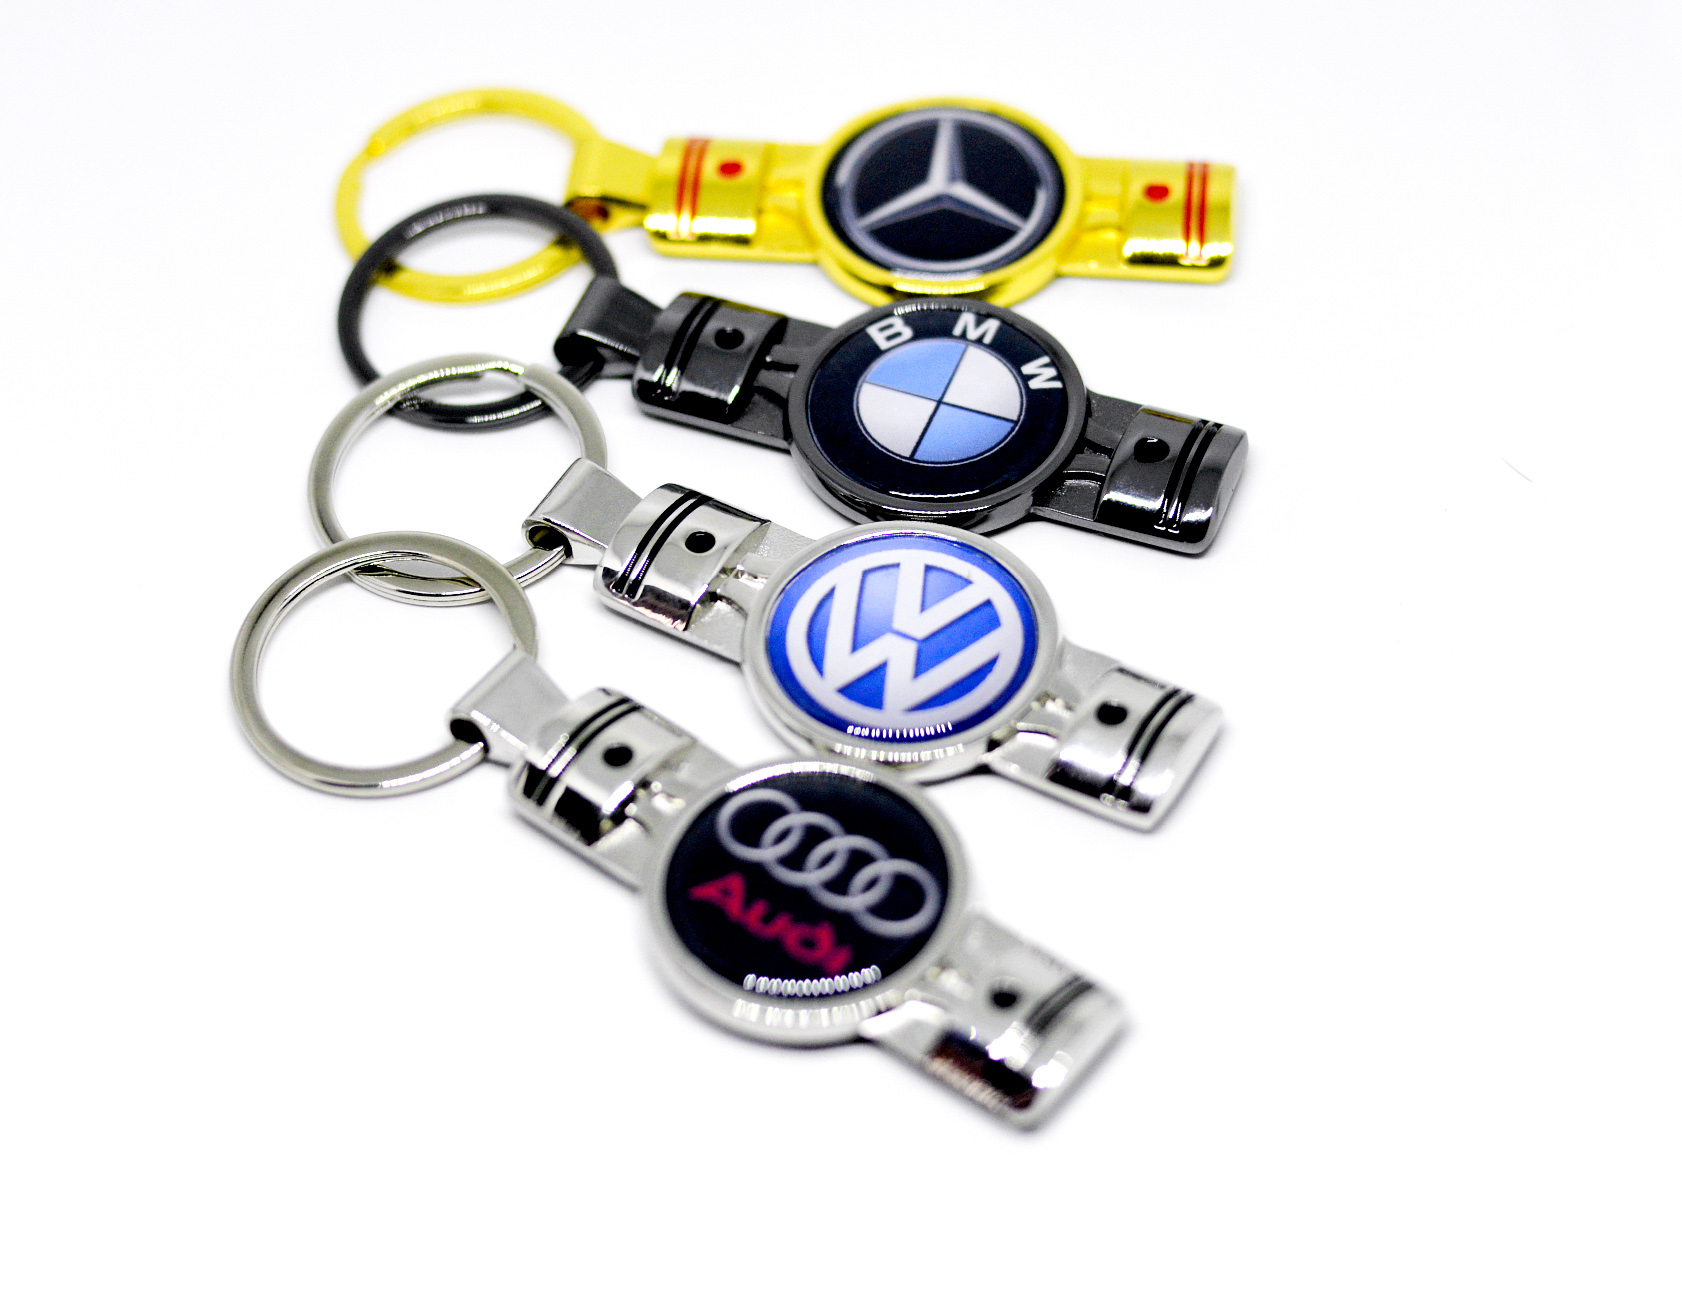 European hot selling piston car license brand number keychain